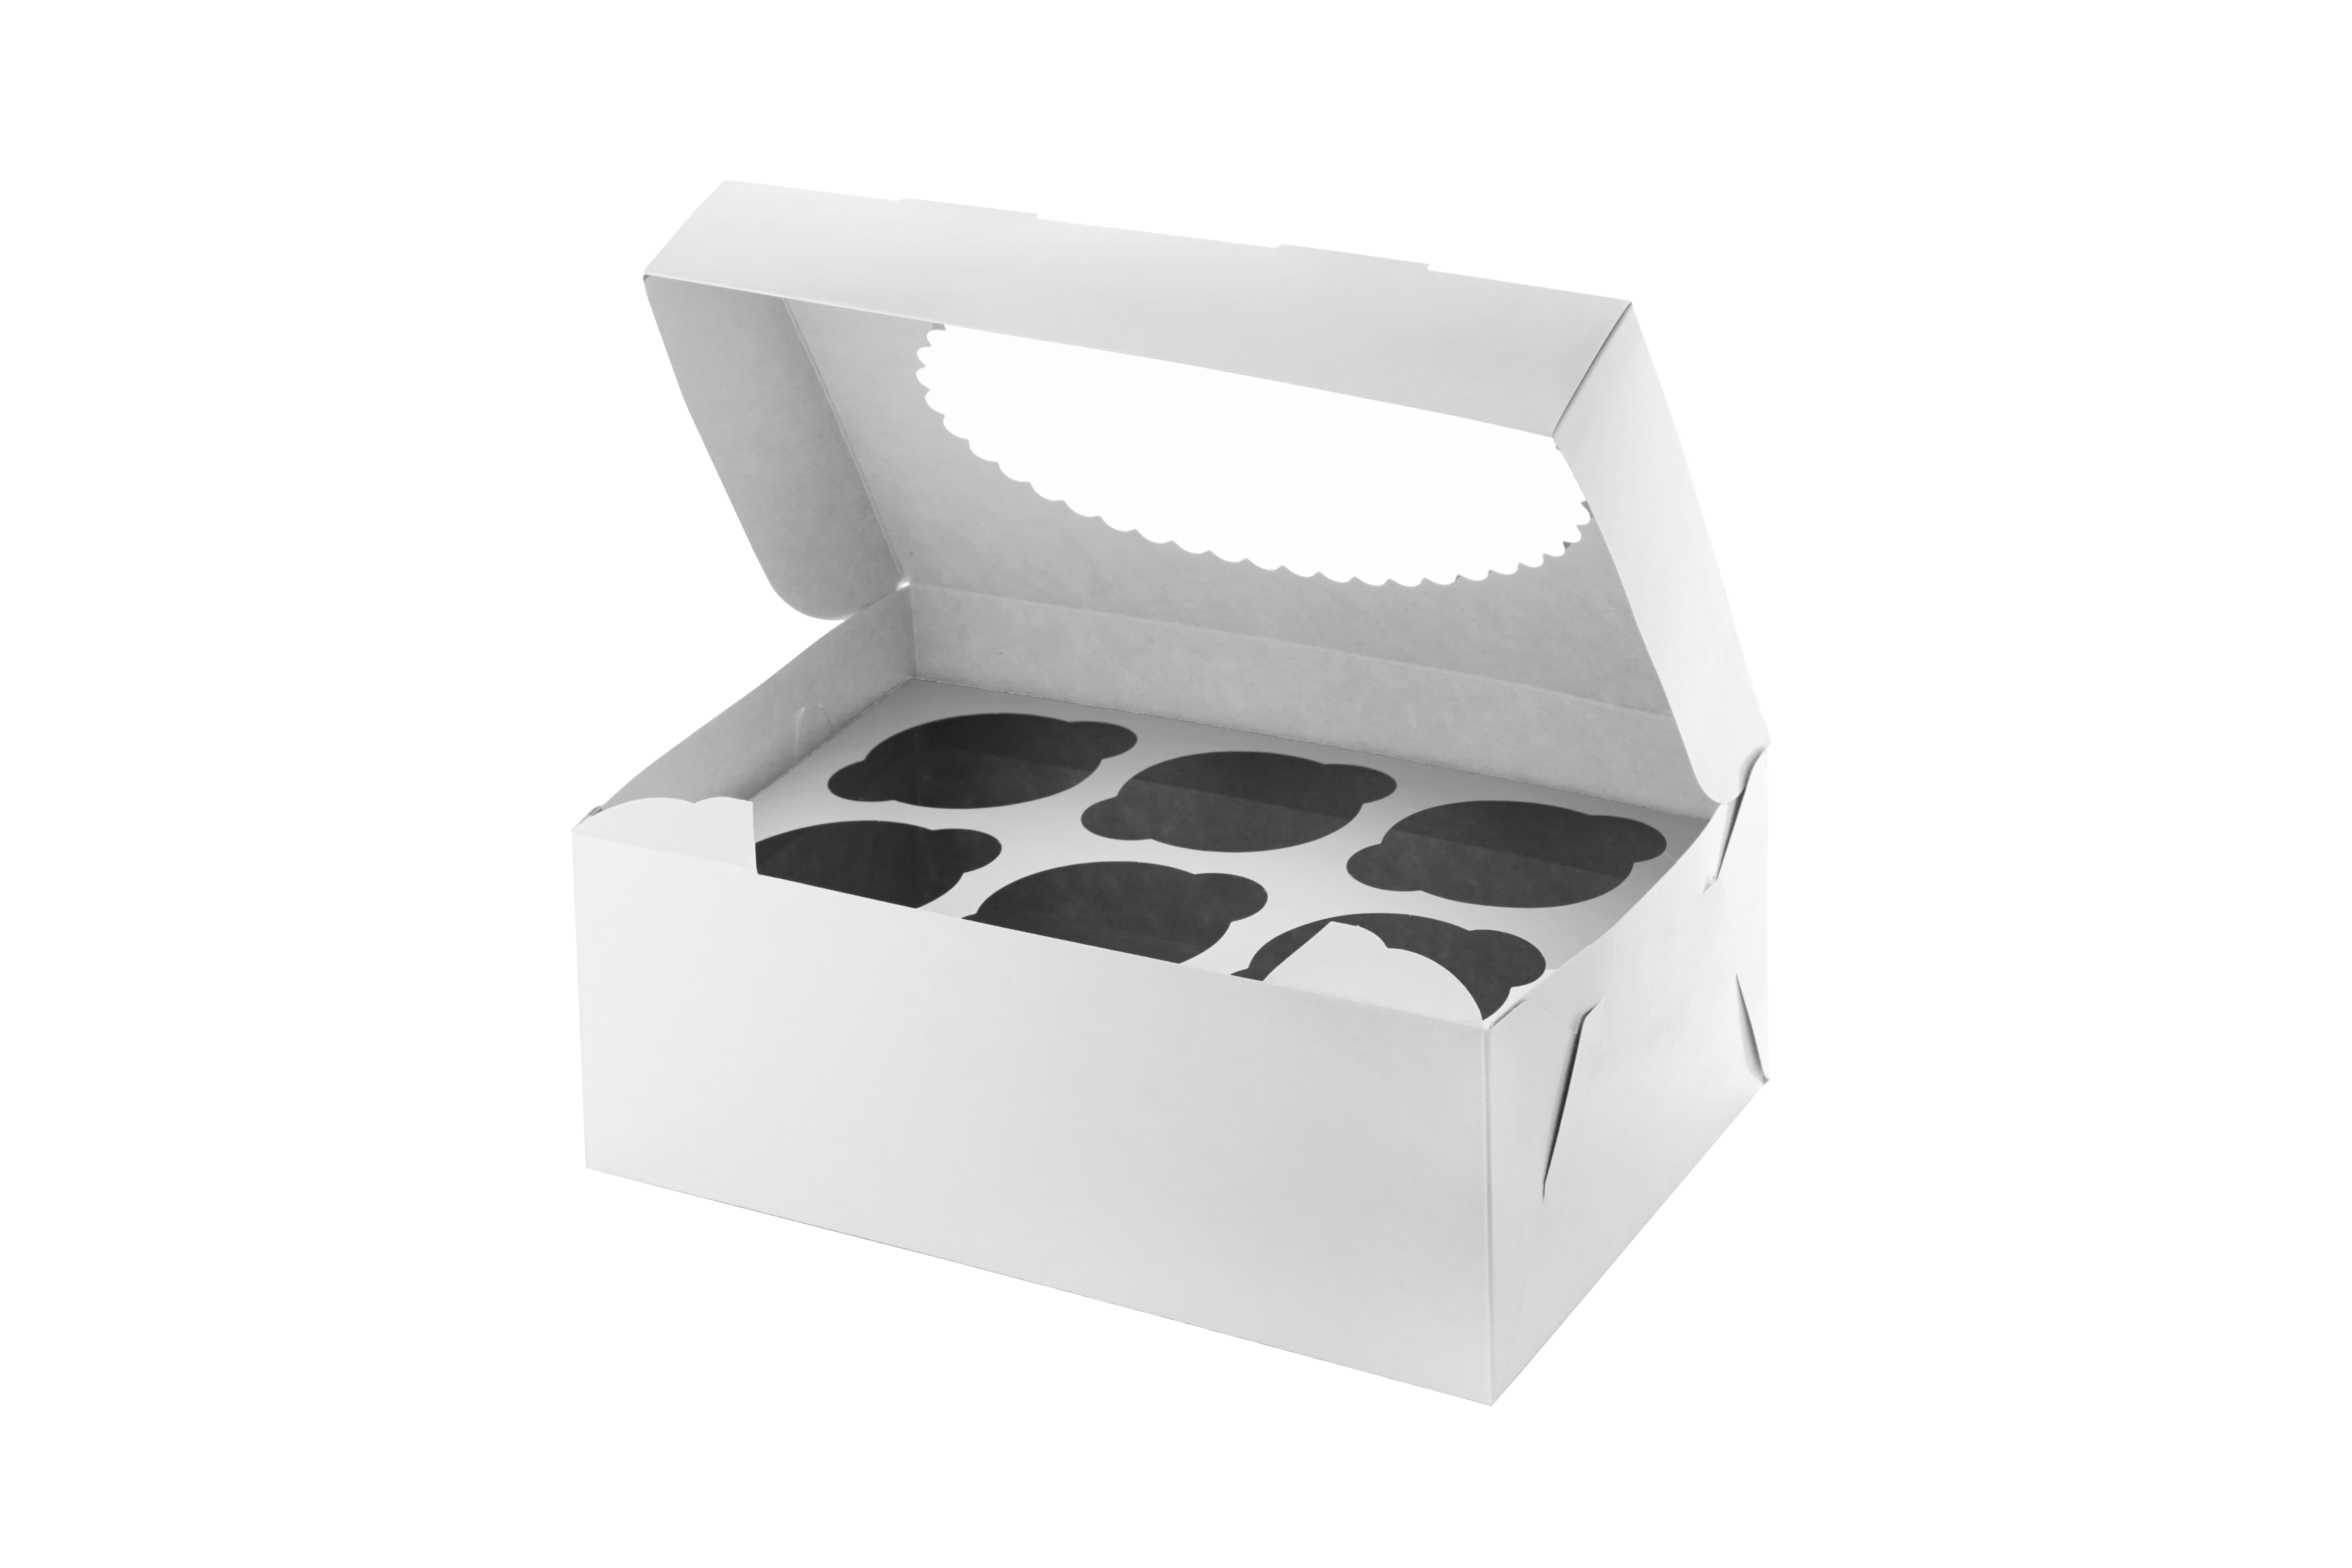 OSQ MUF 3 boxes for muffins